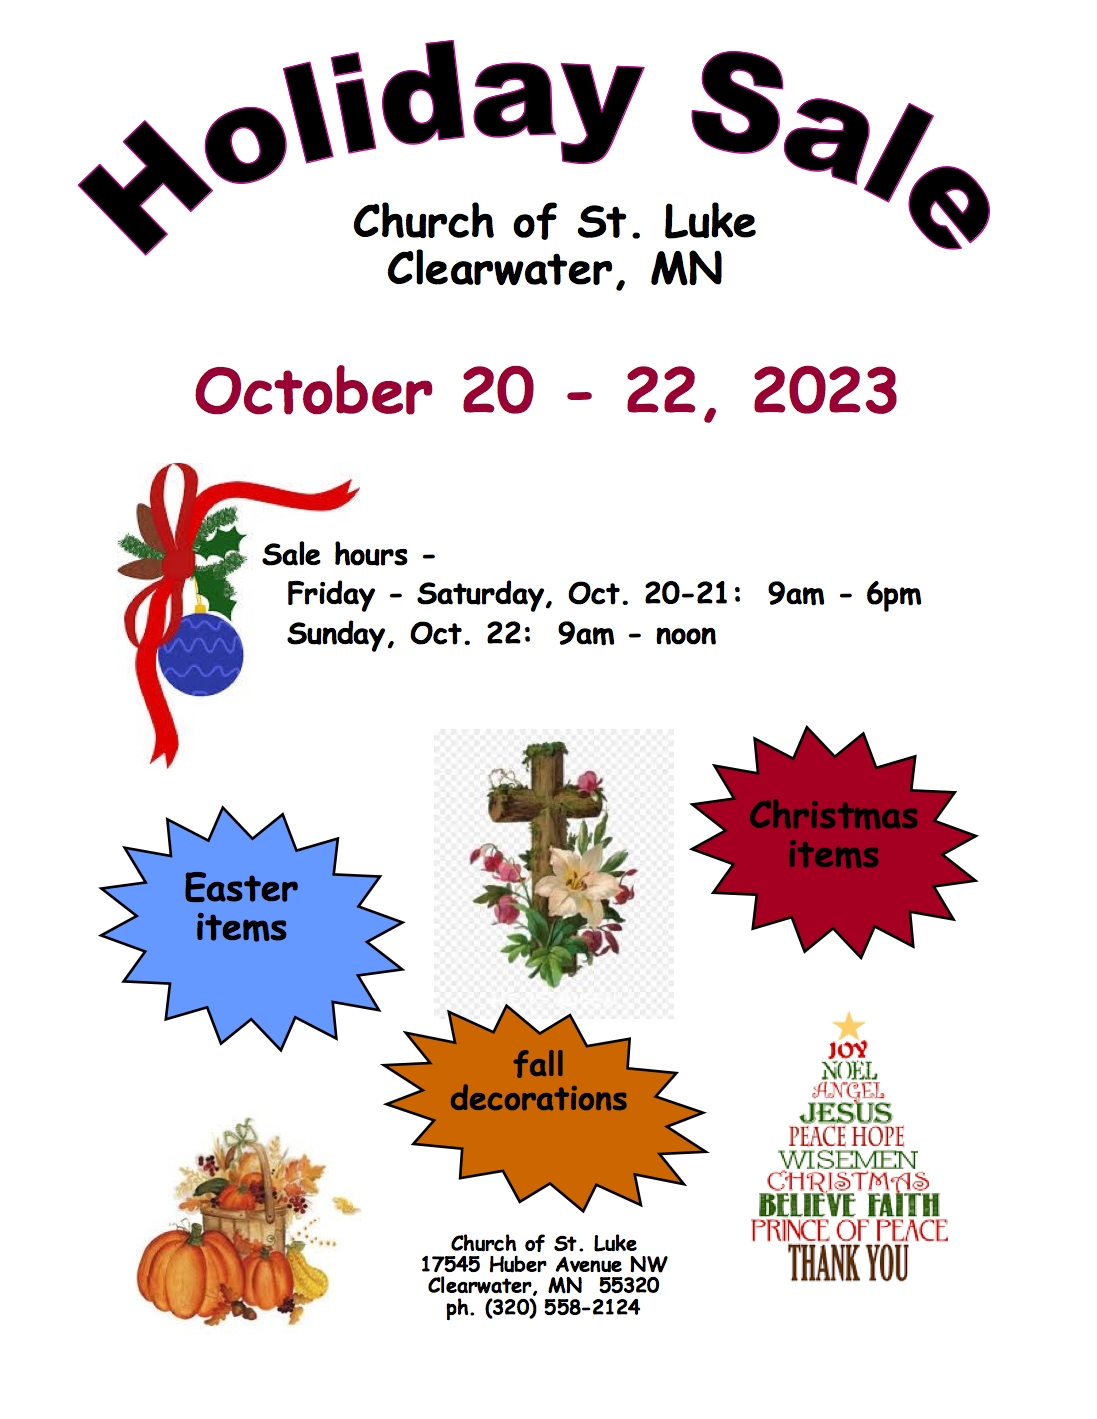 St. Luke's in Clearwater - Holiday Sale!